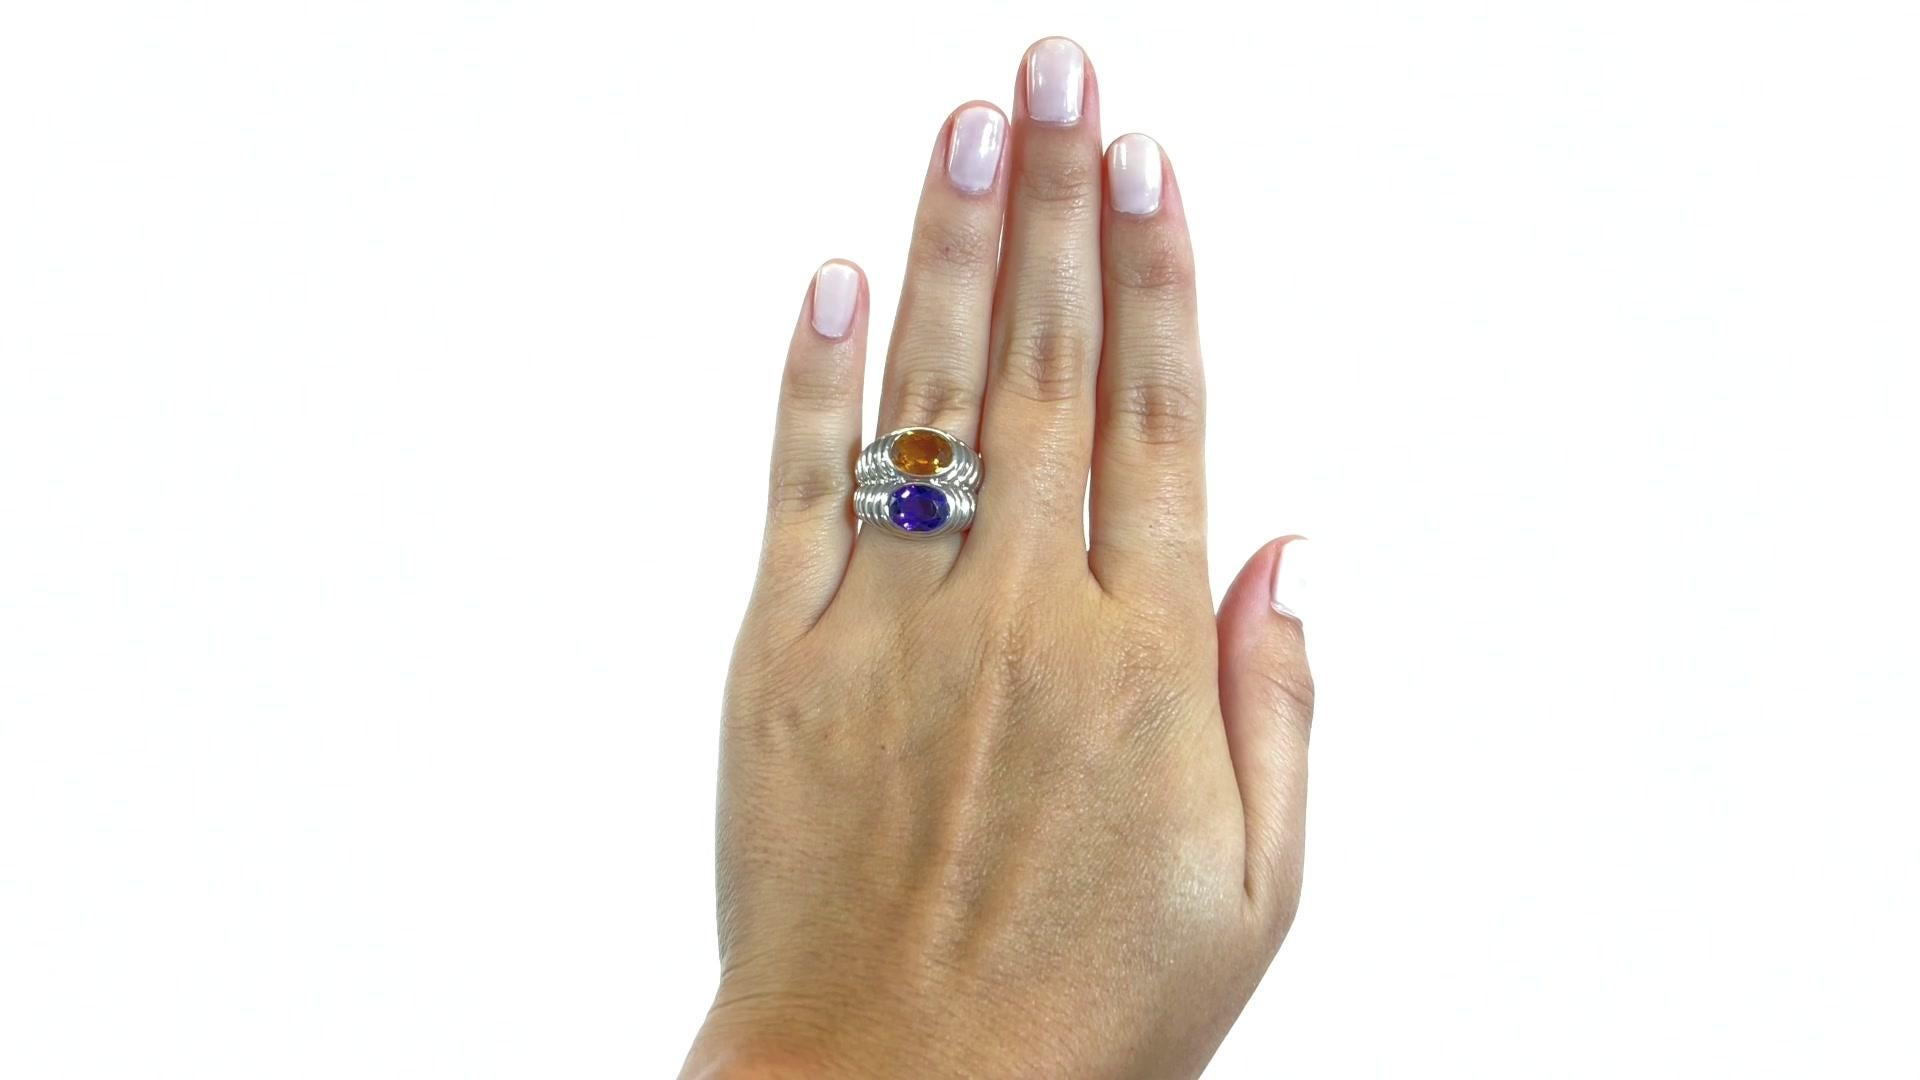 Vintage Bvlgari Amethyst Topaz 18 Karat White Gold Ring. The ring features an amethyst approximately 1.50 carat, an oval topaz approximately 2.00 carat. Signed Bvlgari with Italian hallmarks. Circa 2000s. Size 5 3/4 and may be resized.

About The